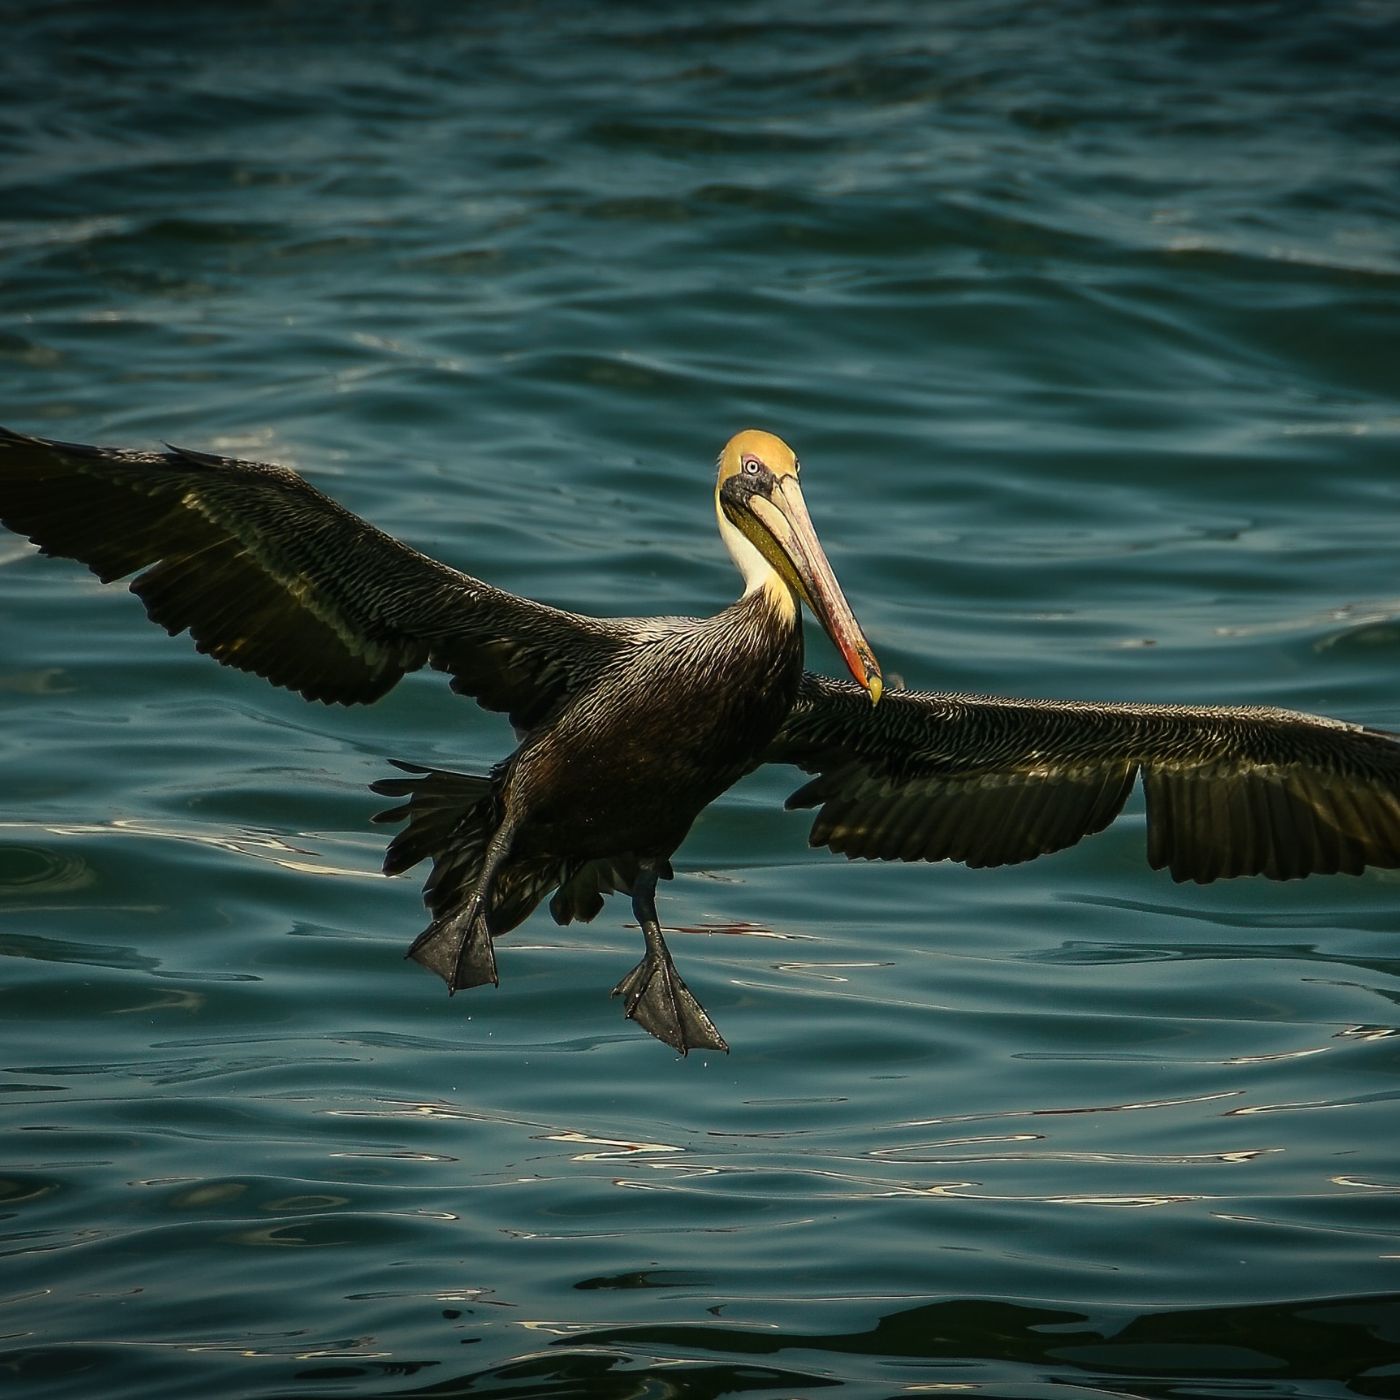 picture of bird flying over water geotagged in cape canaveral, fl. Thank you unsplash/Ron Graham for photo.